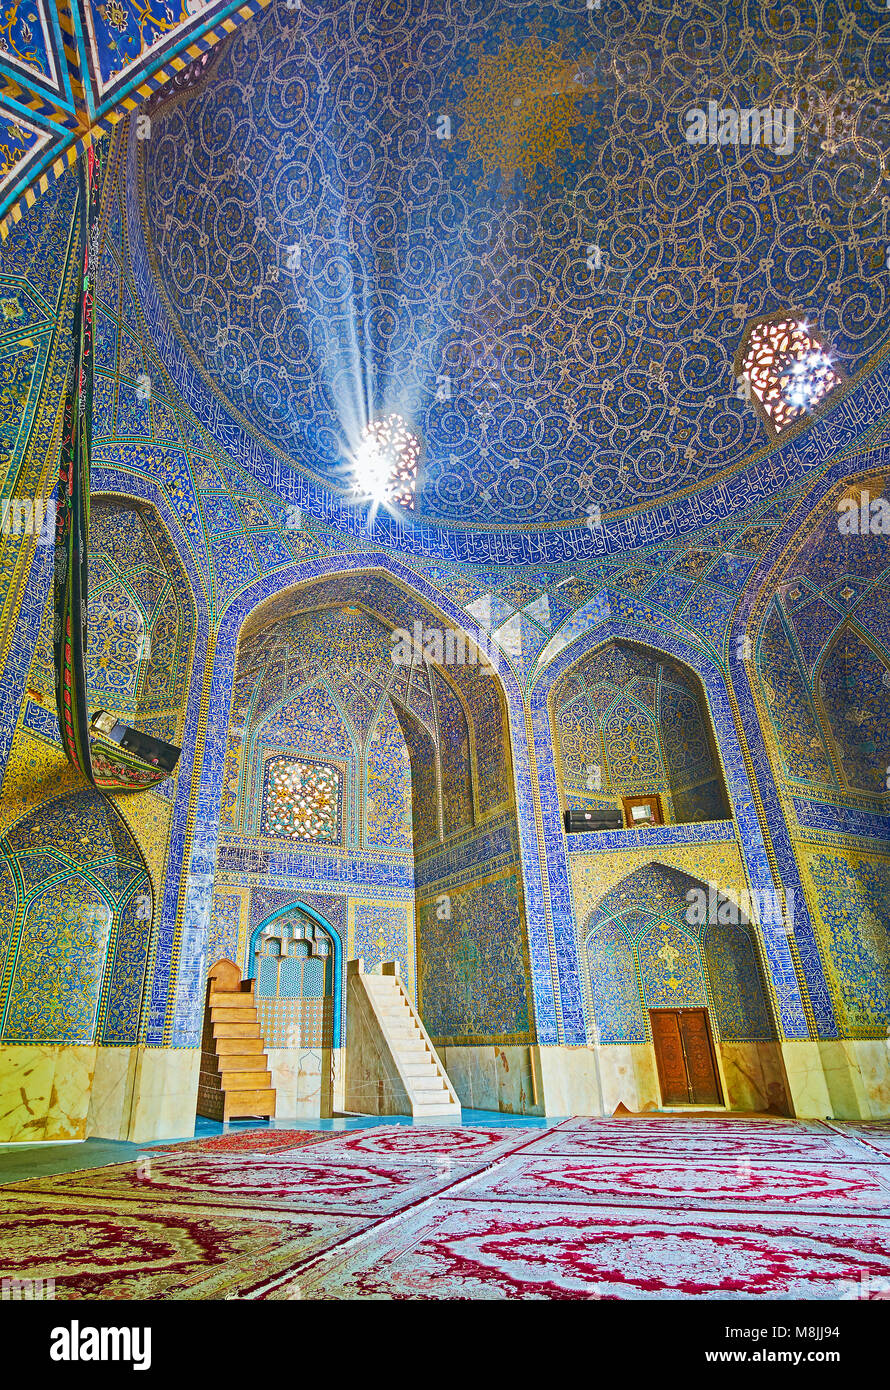 ISFAHAN, IRAN - OCTOBER 20, 2017: Interior of mosque of Chaharbagh madraseh, walls and dome decorated with beautiful ornaments of glazed tiles, on Oct Stock Photo